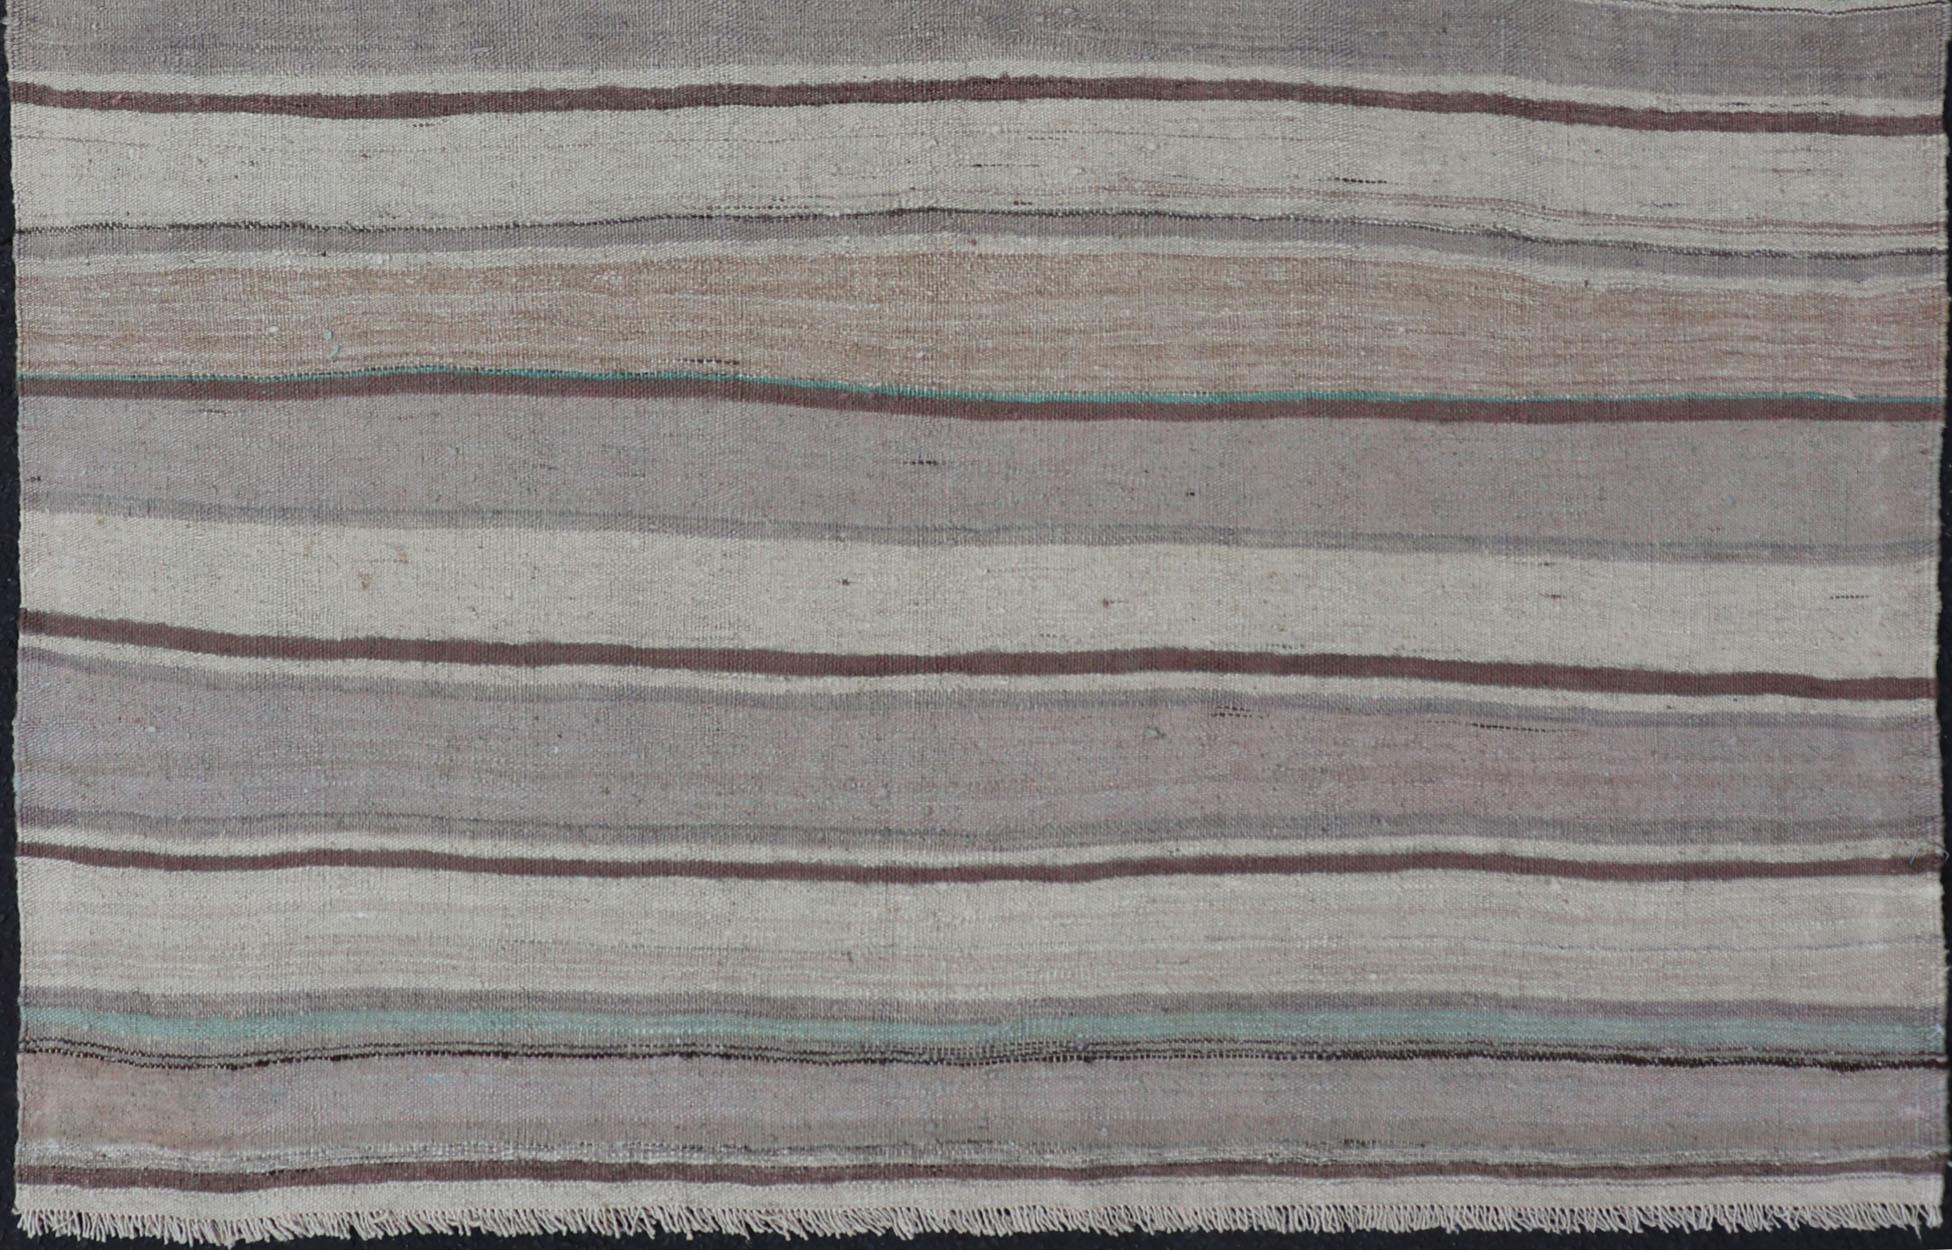 Hand-Woven Square Turkish Vintage Flat-Weave in Brown, Lavender, and Cream Stripe Design